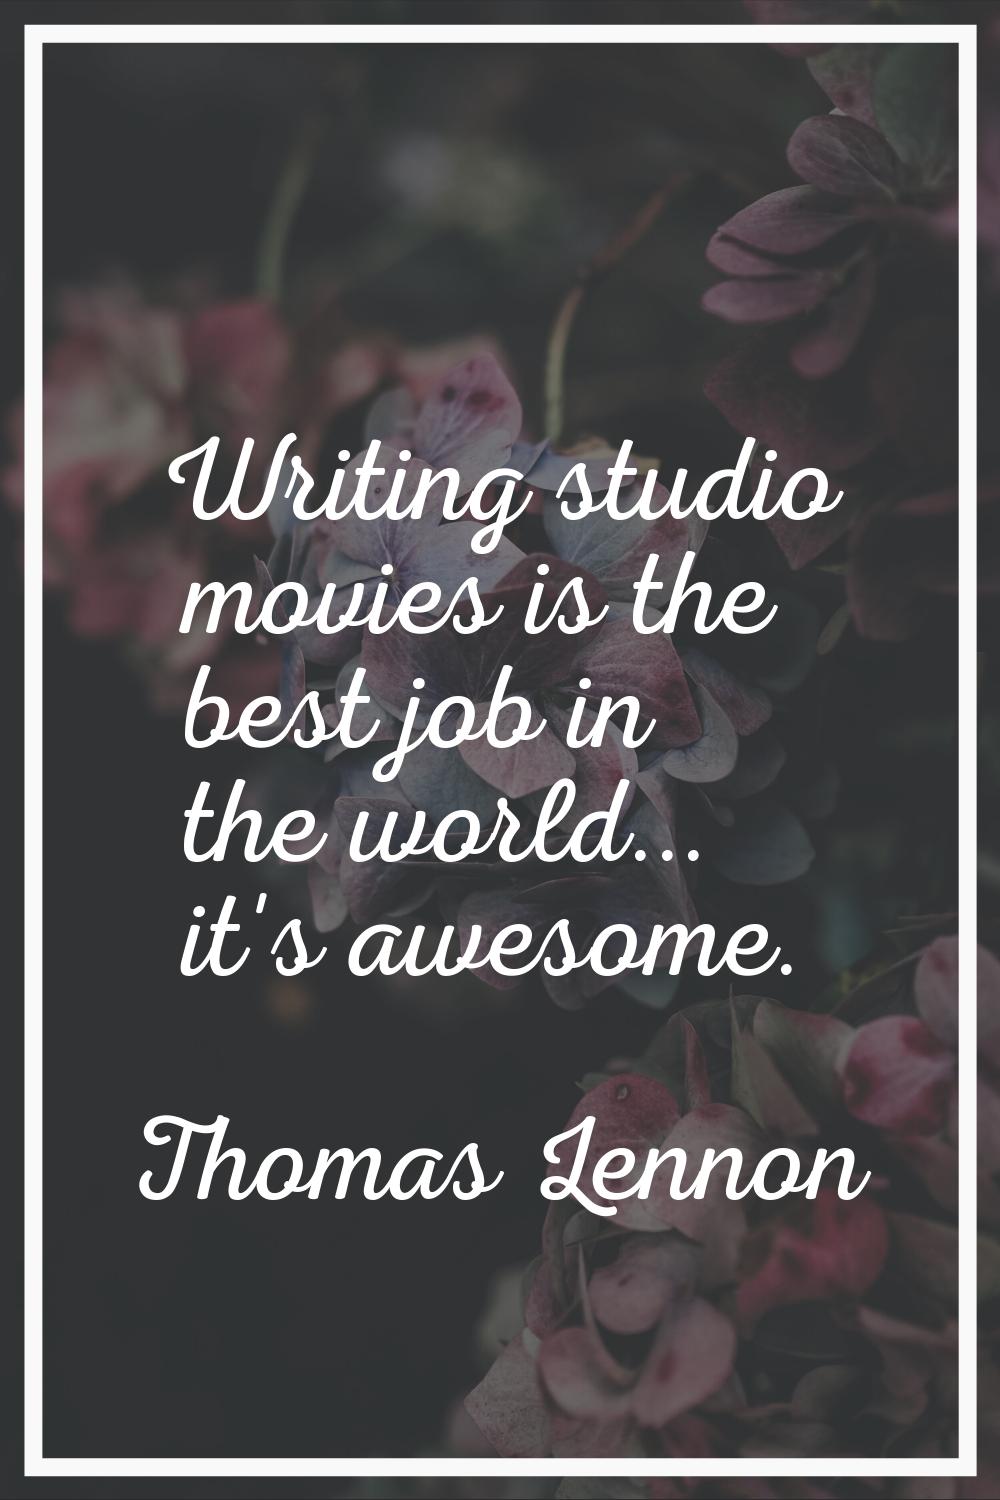 Writing studio movies is the best job in the world... it's awesome.